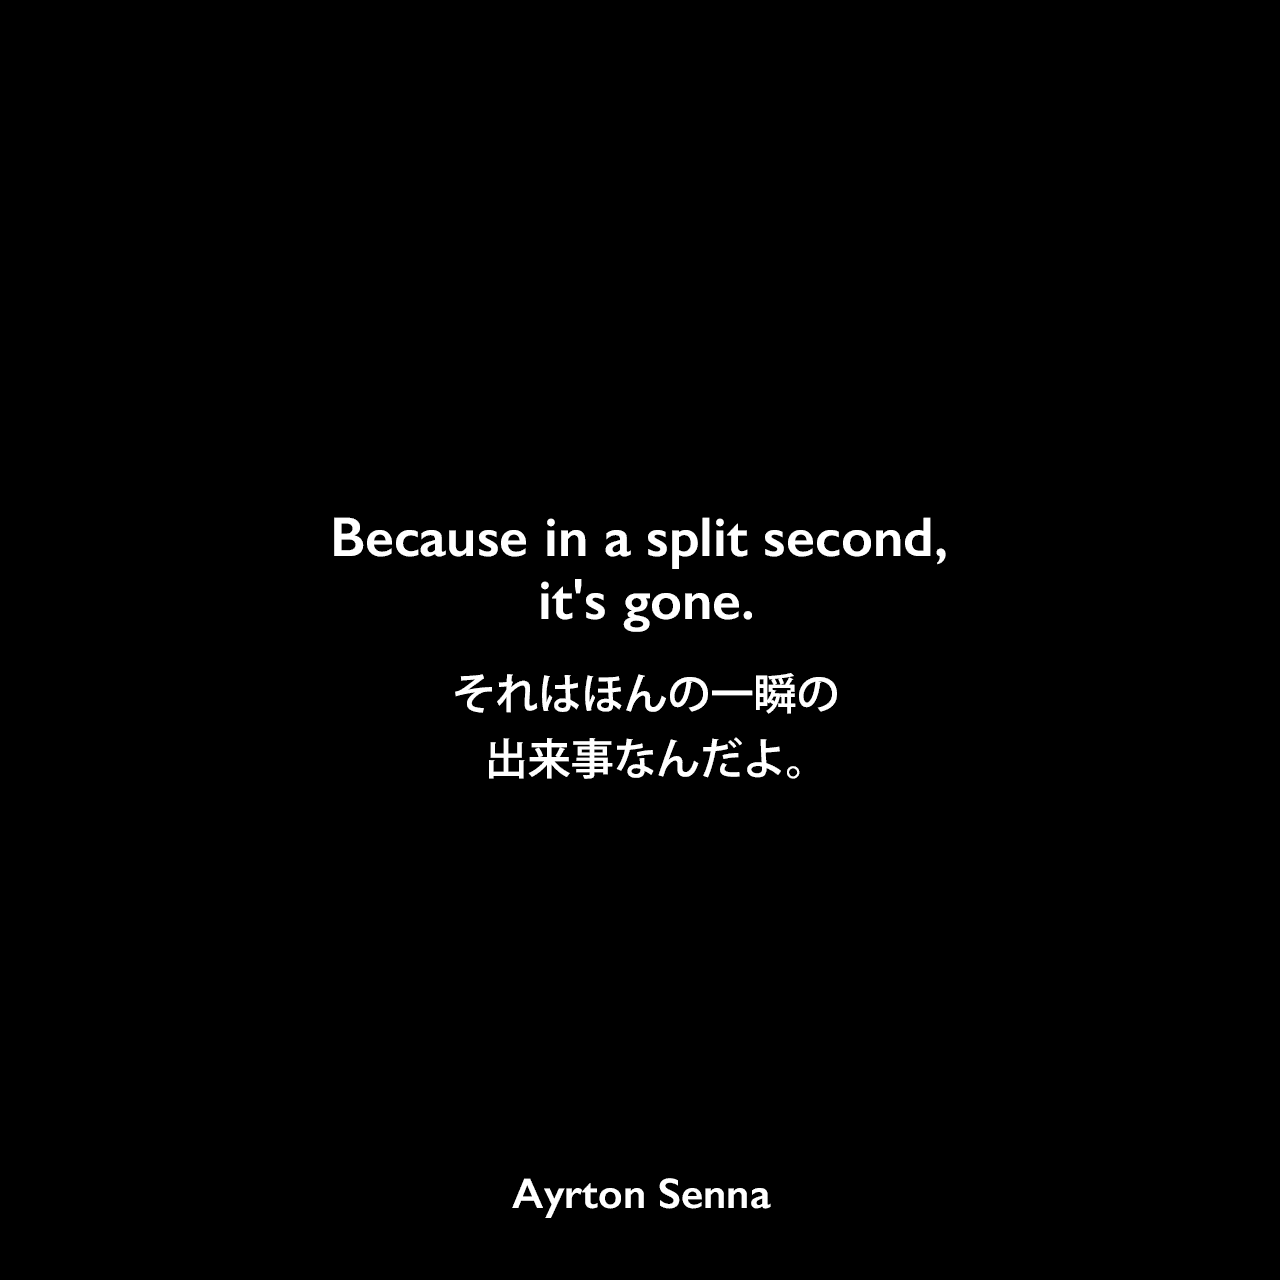 Because in a split second, it's gone.それはほんの一瞬の出来事なんだよ。Ayrton Senna